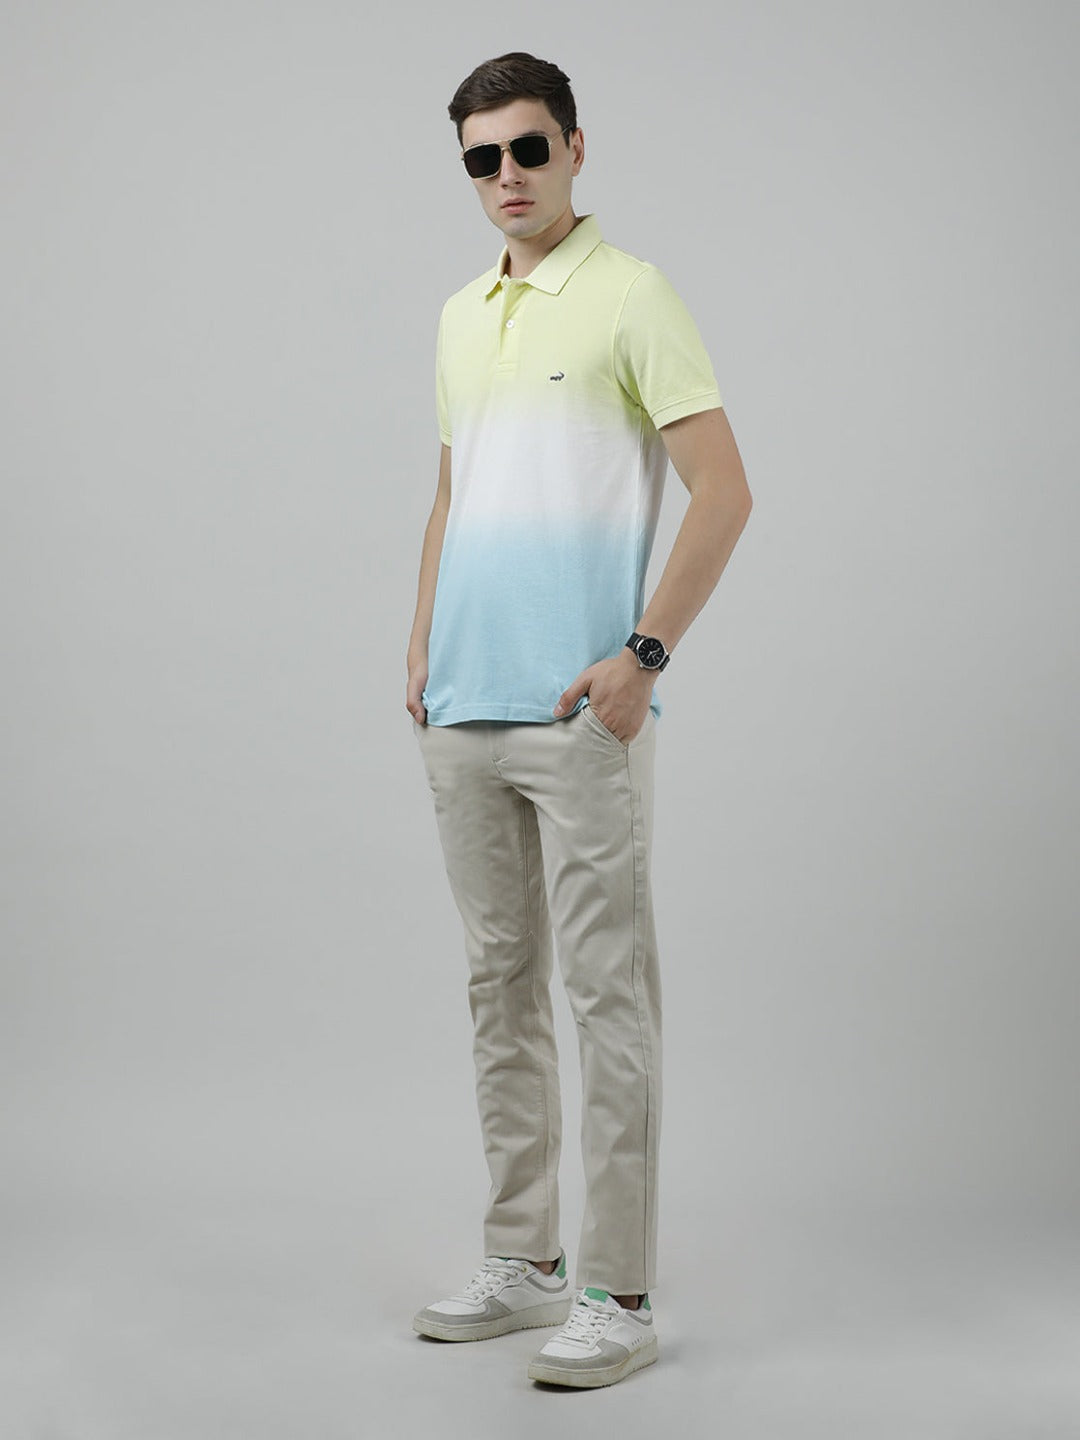 Crocodile Casual Yellow T-Shirt Half Sleeve Slim Fit with Collar for Men